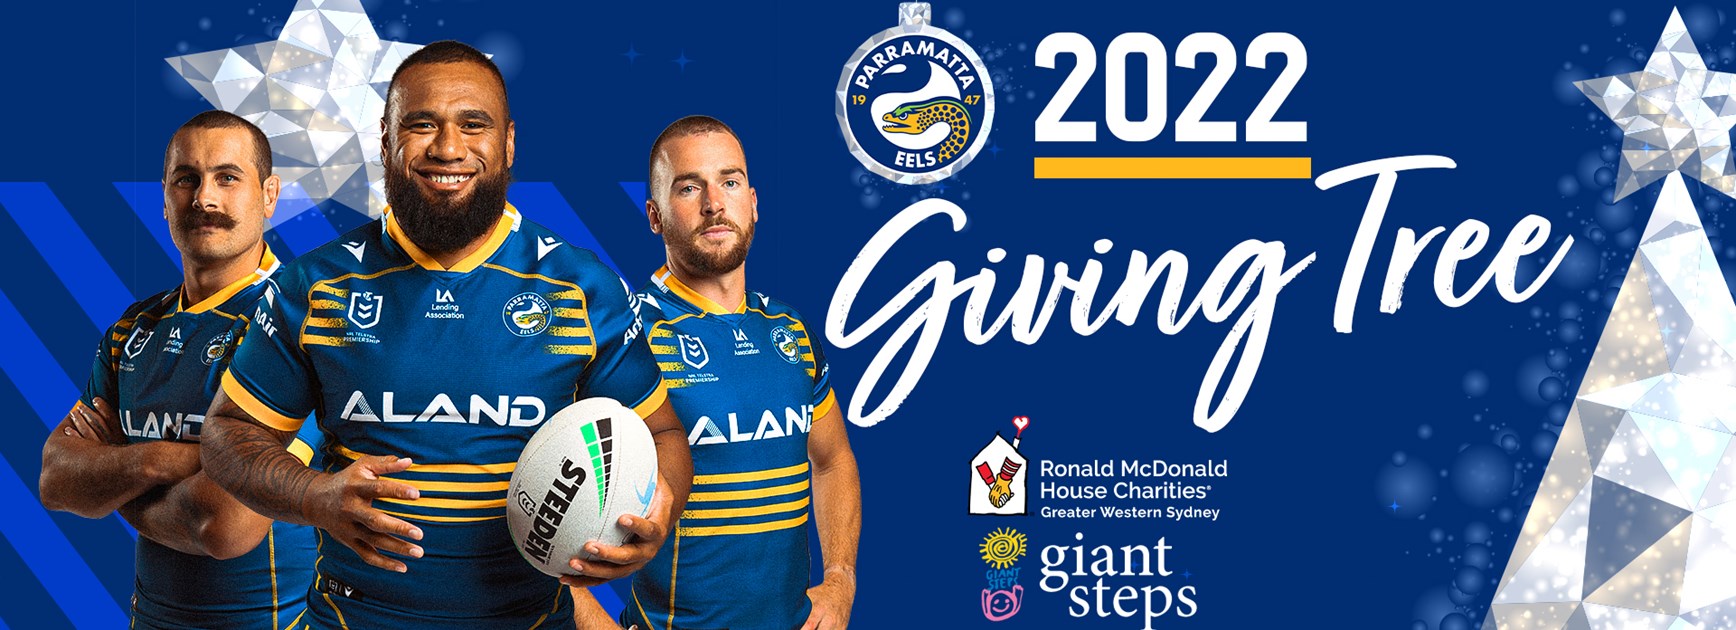 Eels invite community to join Christmas appeal